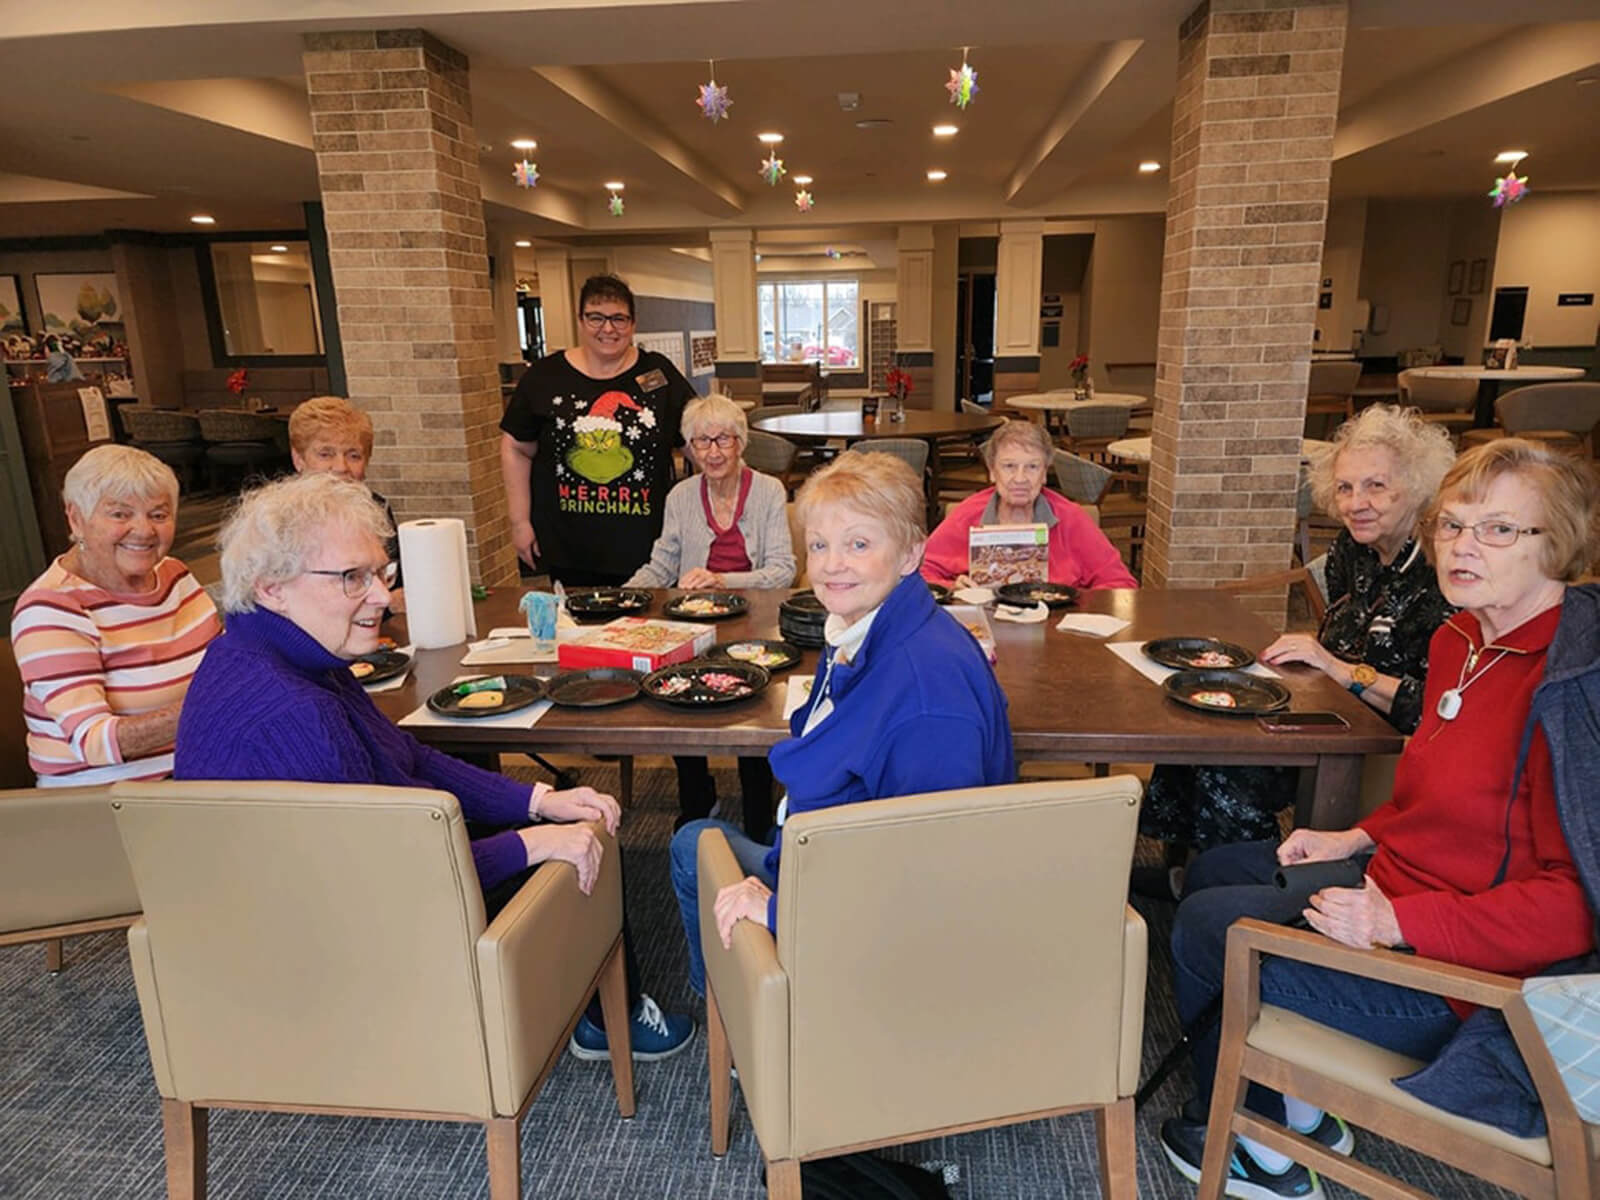 Residents of The Waters of Pewaukee gathered around a table for a fun cookie decorating session, sharing smiles and creativity.